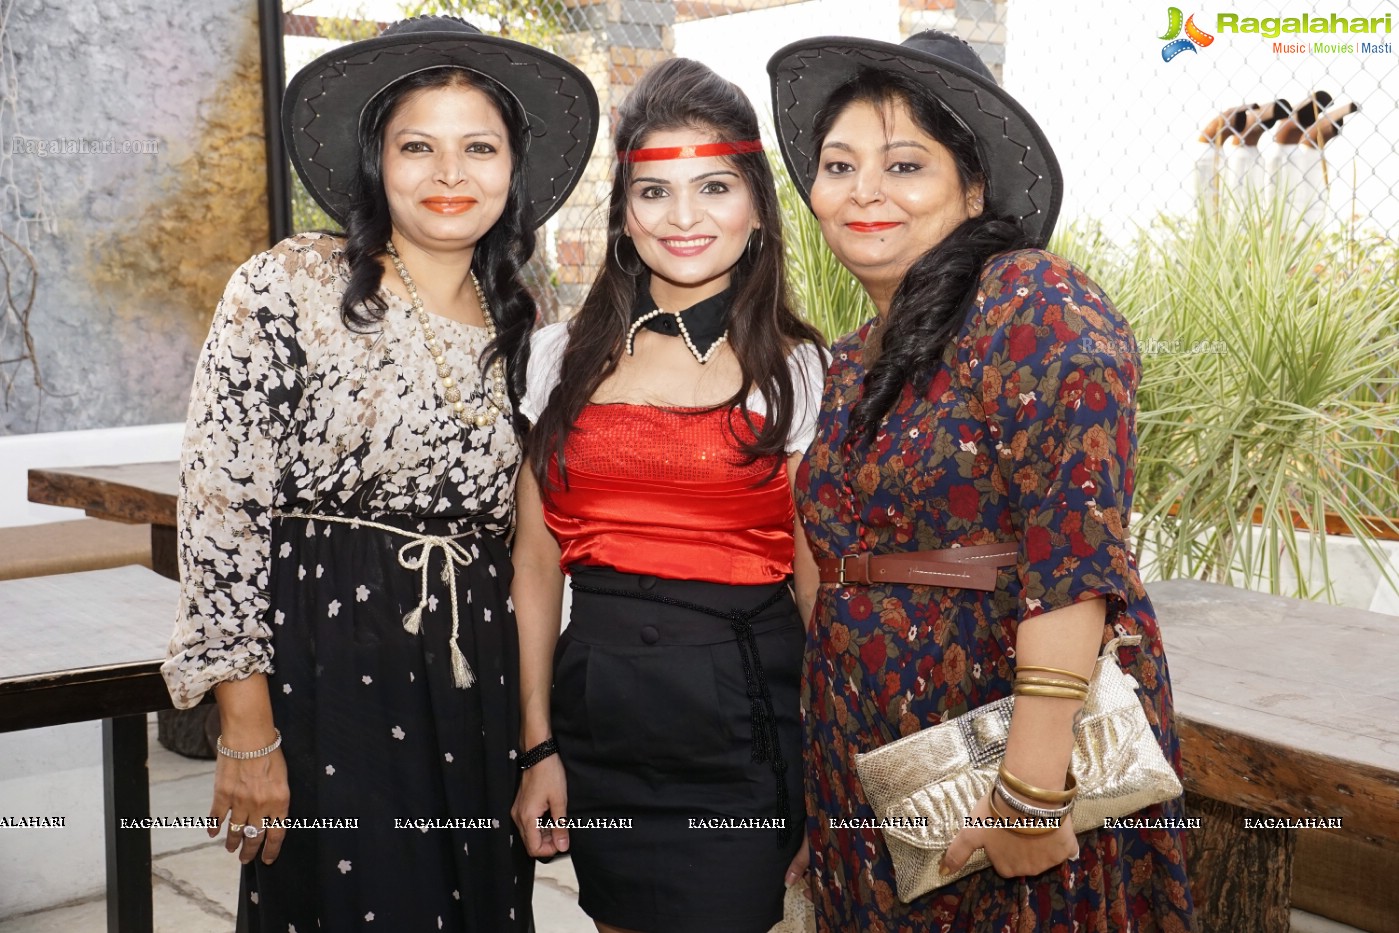 The Lady Pirates Theme Event by Femmis at Pirates Brew, Hyderabad